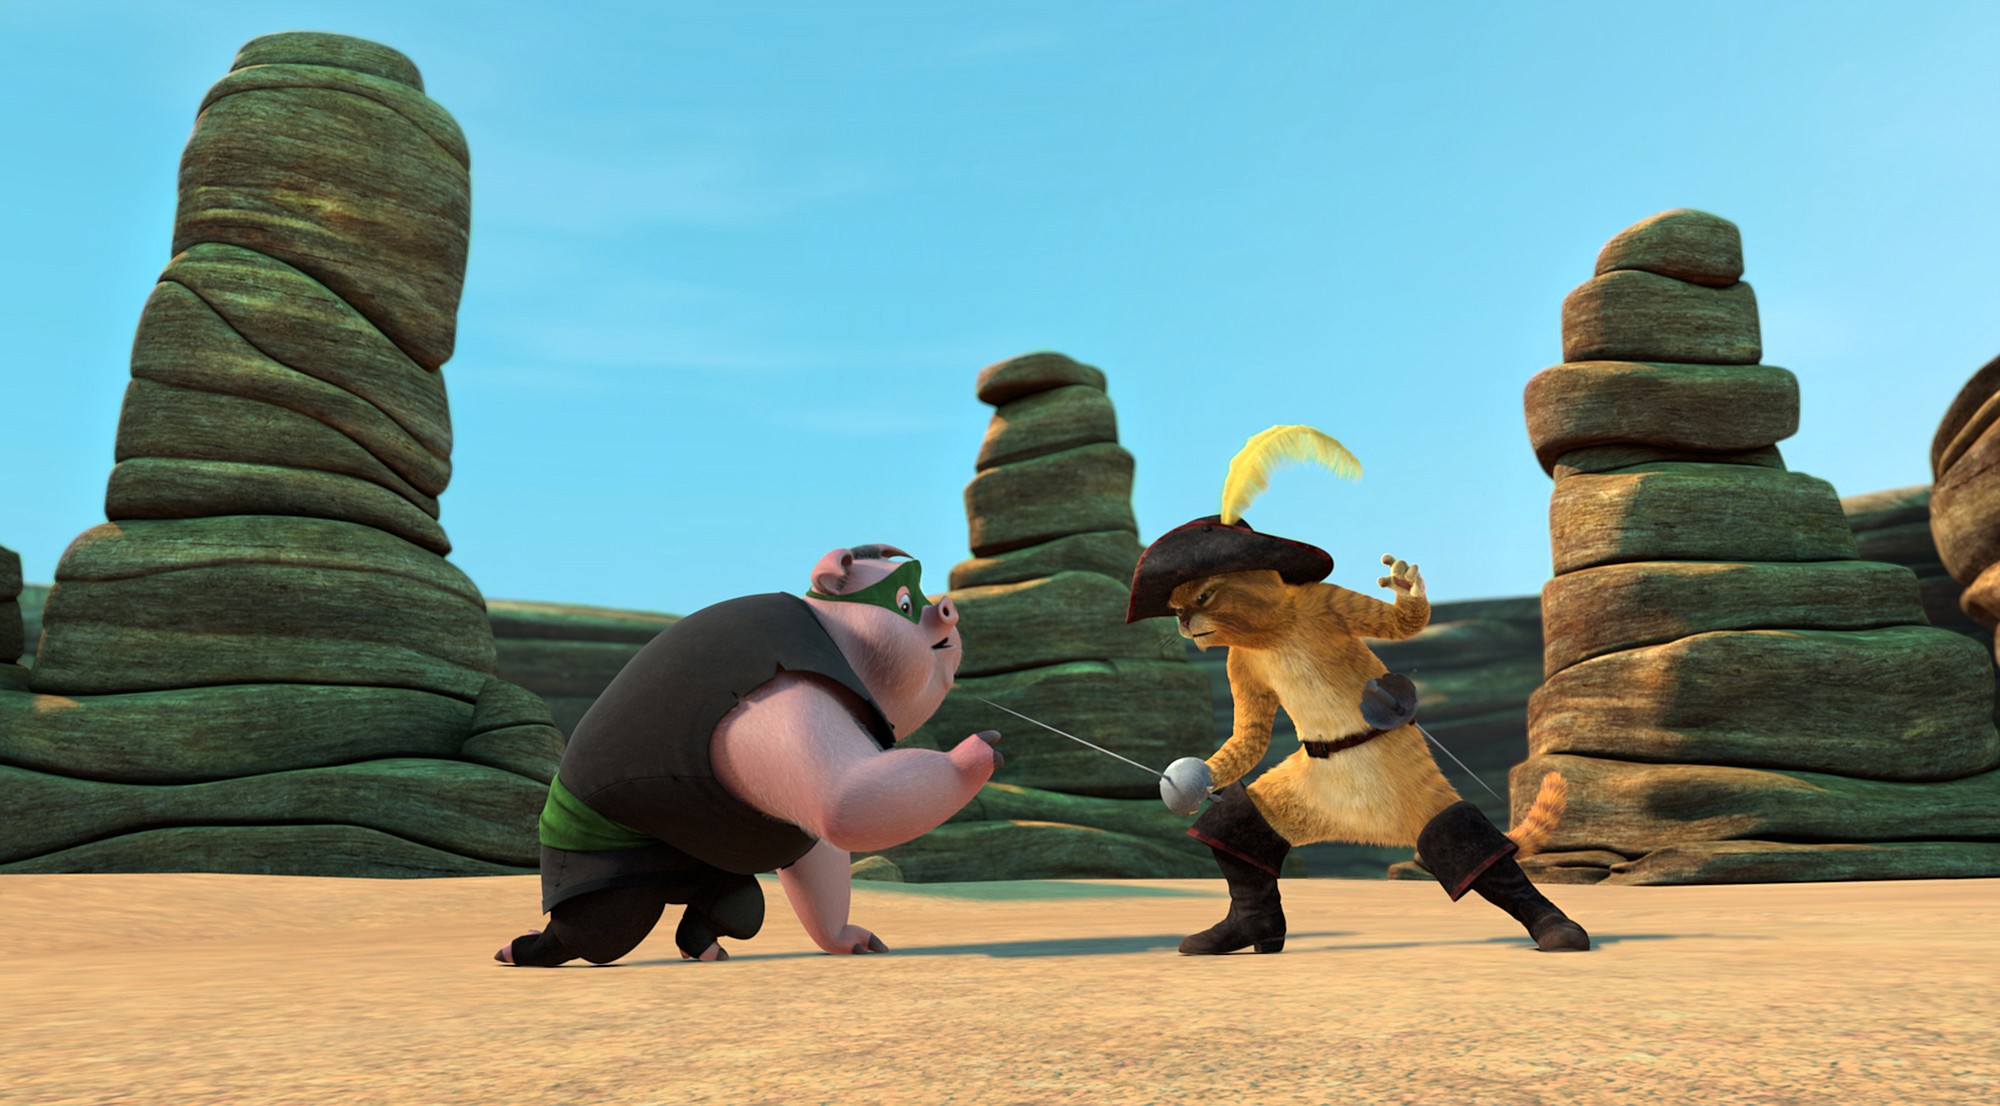 Tribune News Service
Puss in Boots faces off with a band of ninja pigs attempting to steal one of San Lorenzo's greatest treasures in &quot;Brothers,&quot; one of the first five episodes of DreamWorks Animation's &quot;The Adventures of Puss in Boots,&quot; an all-new Netflix original series.